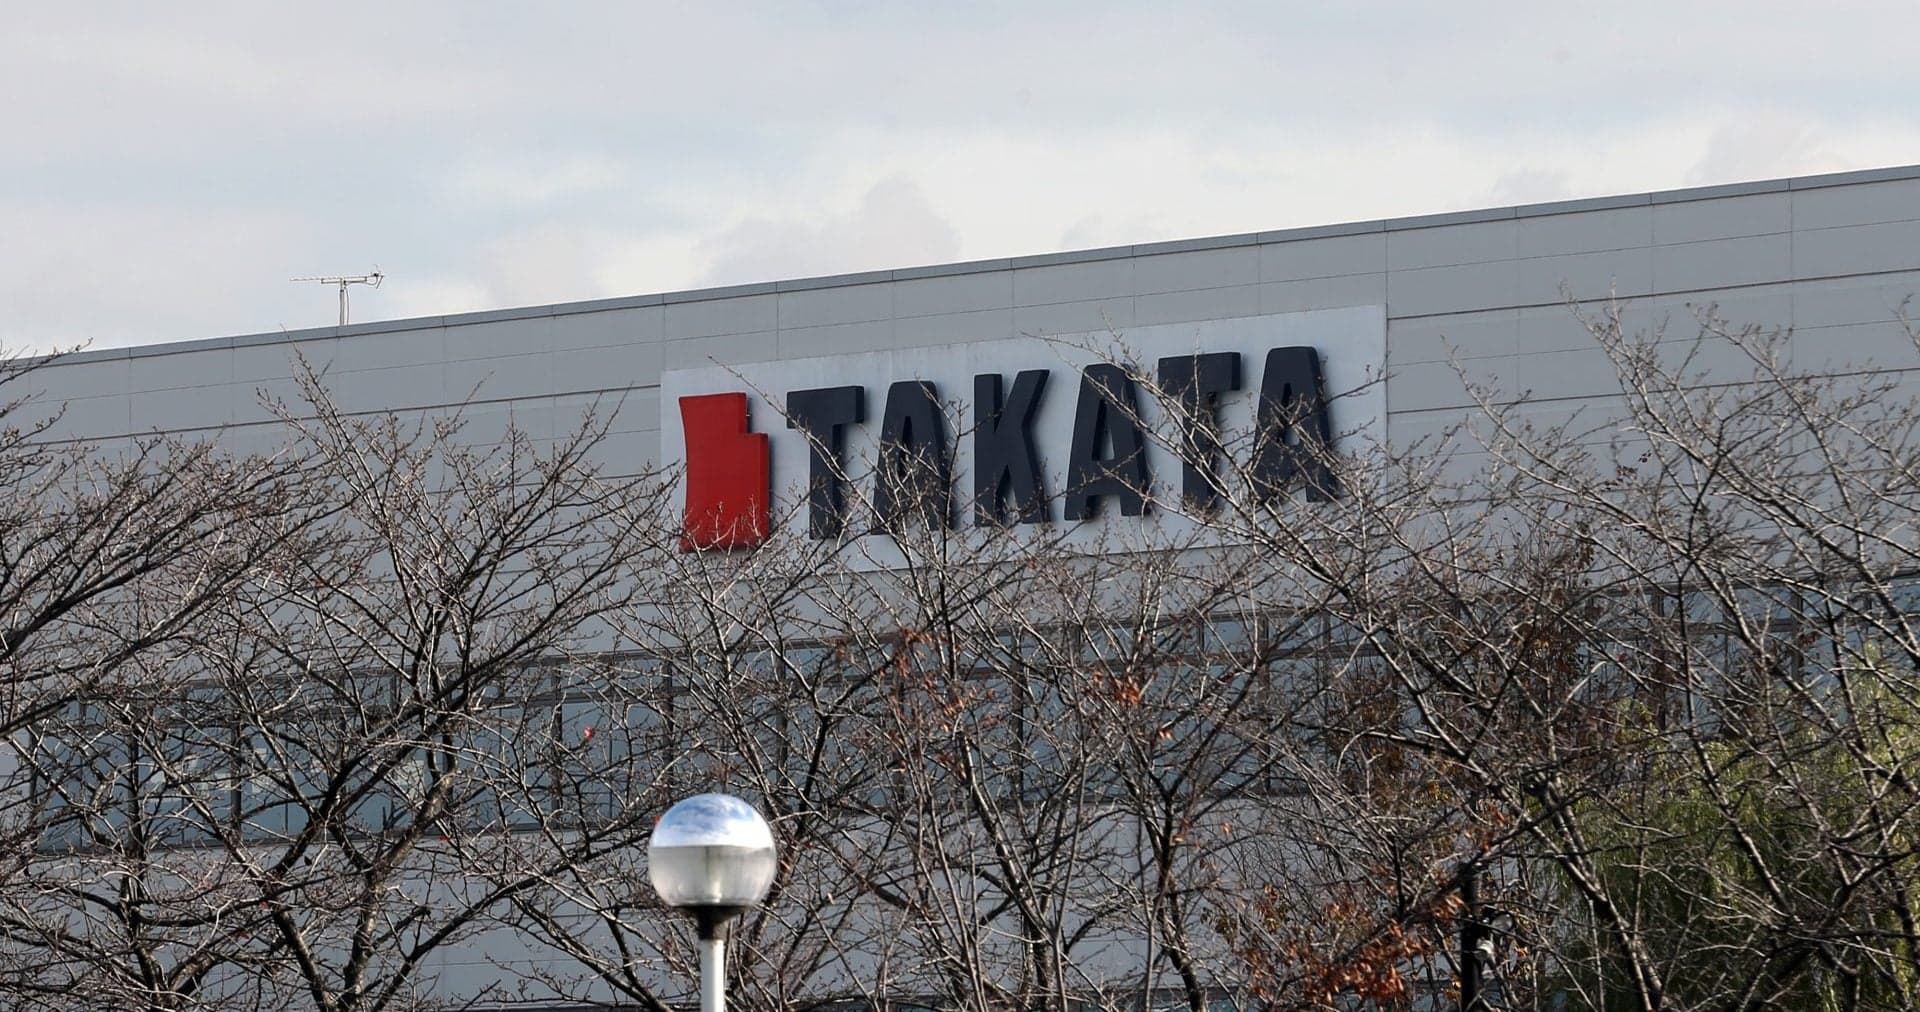 Hawaii Sues Automakers For Using Takata Airbags